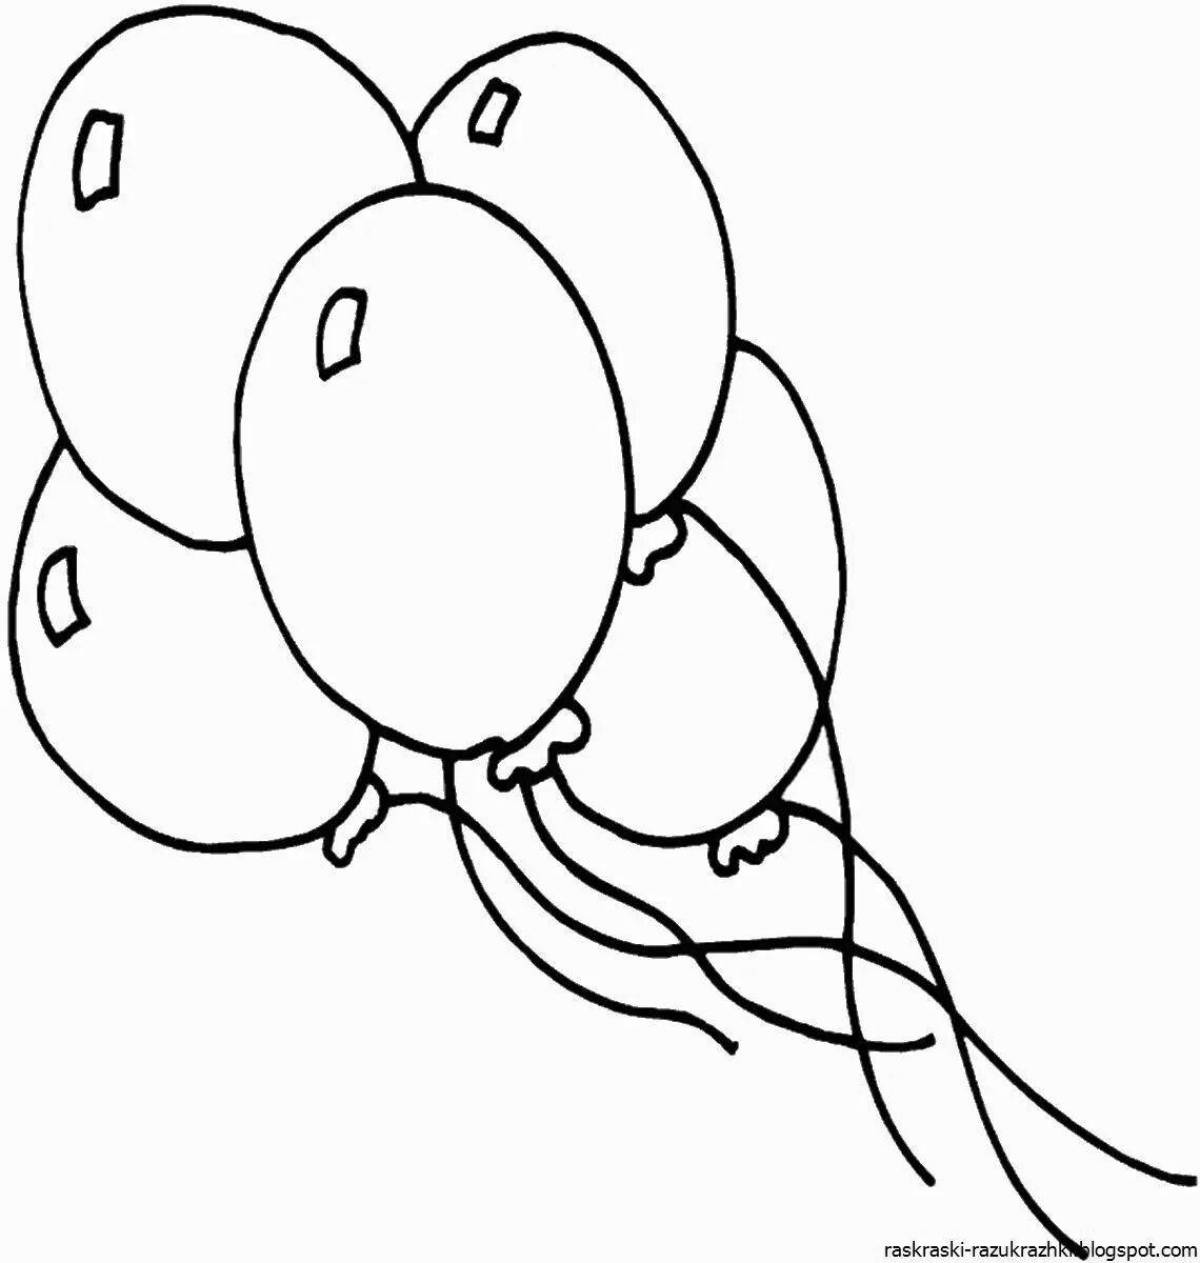 Holiday coloring book with balloons for kids